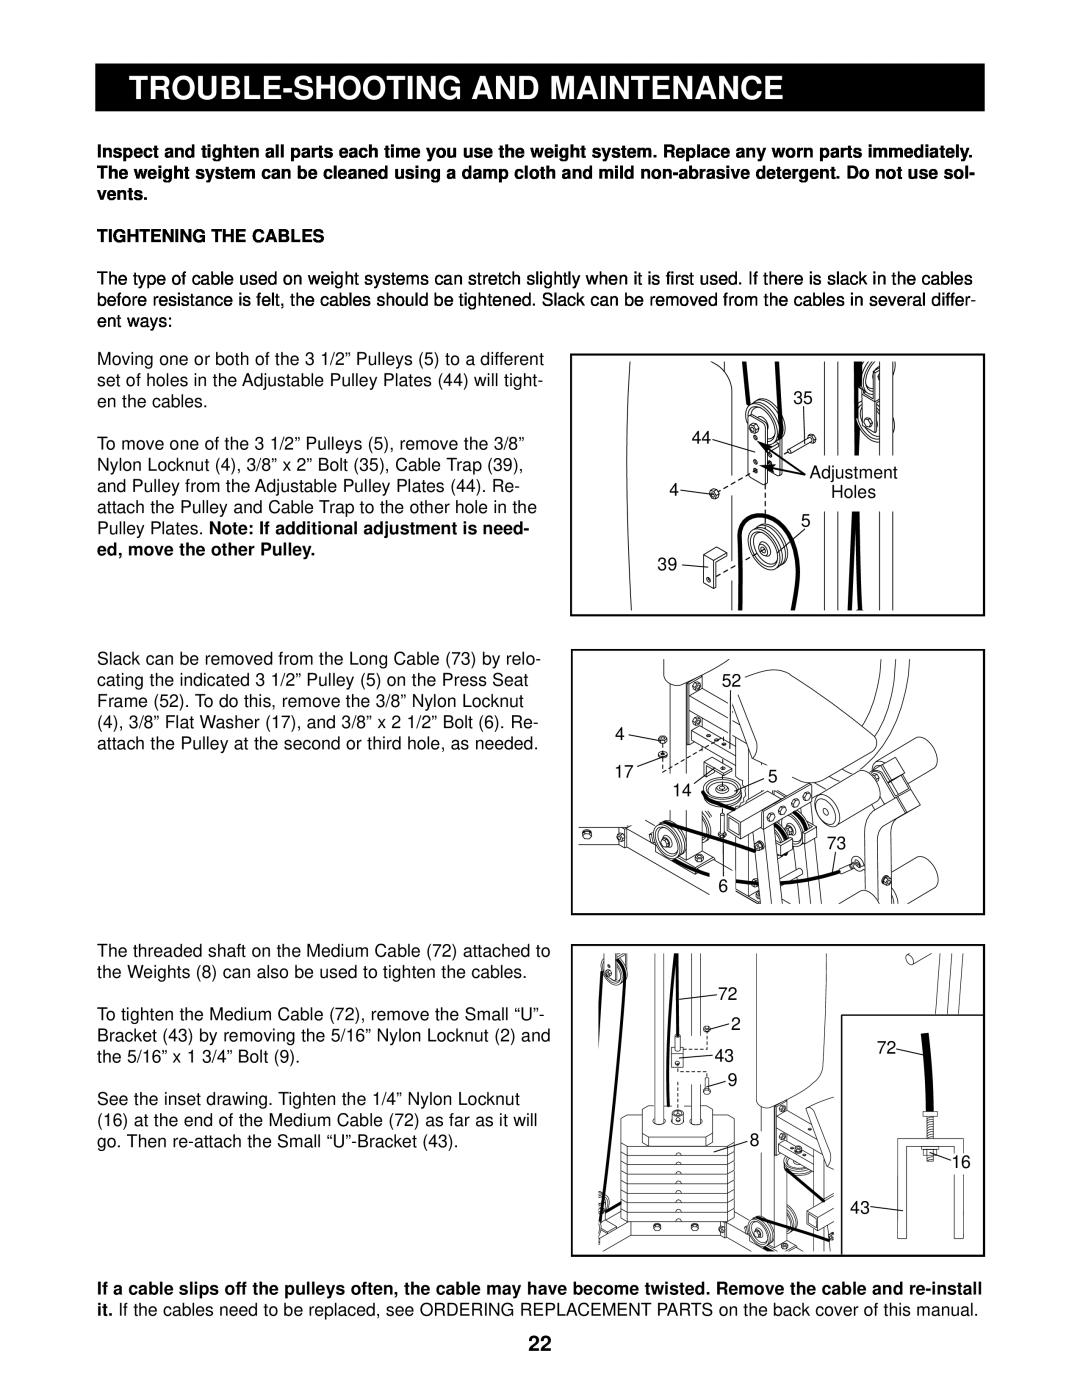 Weider WESY99300 user manual Trouble-Shooting And Maintenance, Tightening The Cables, Note If additional adjustment is need 